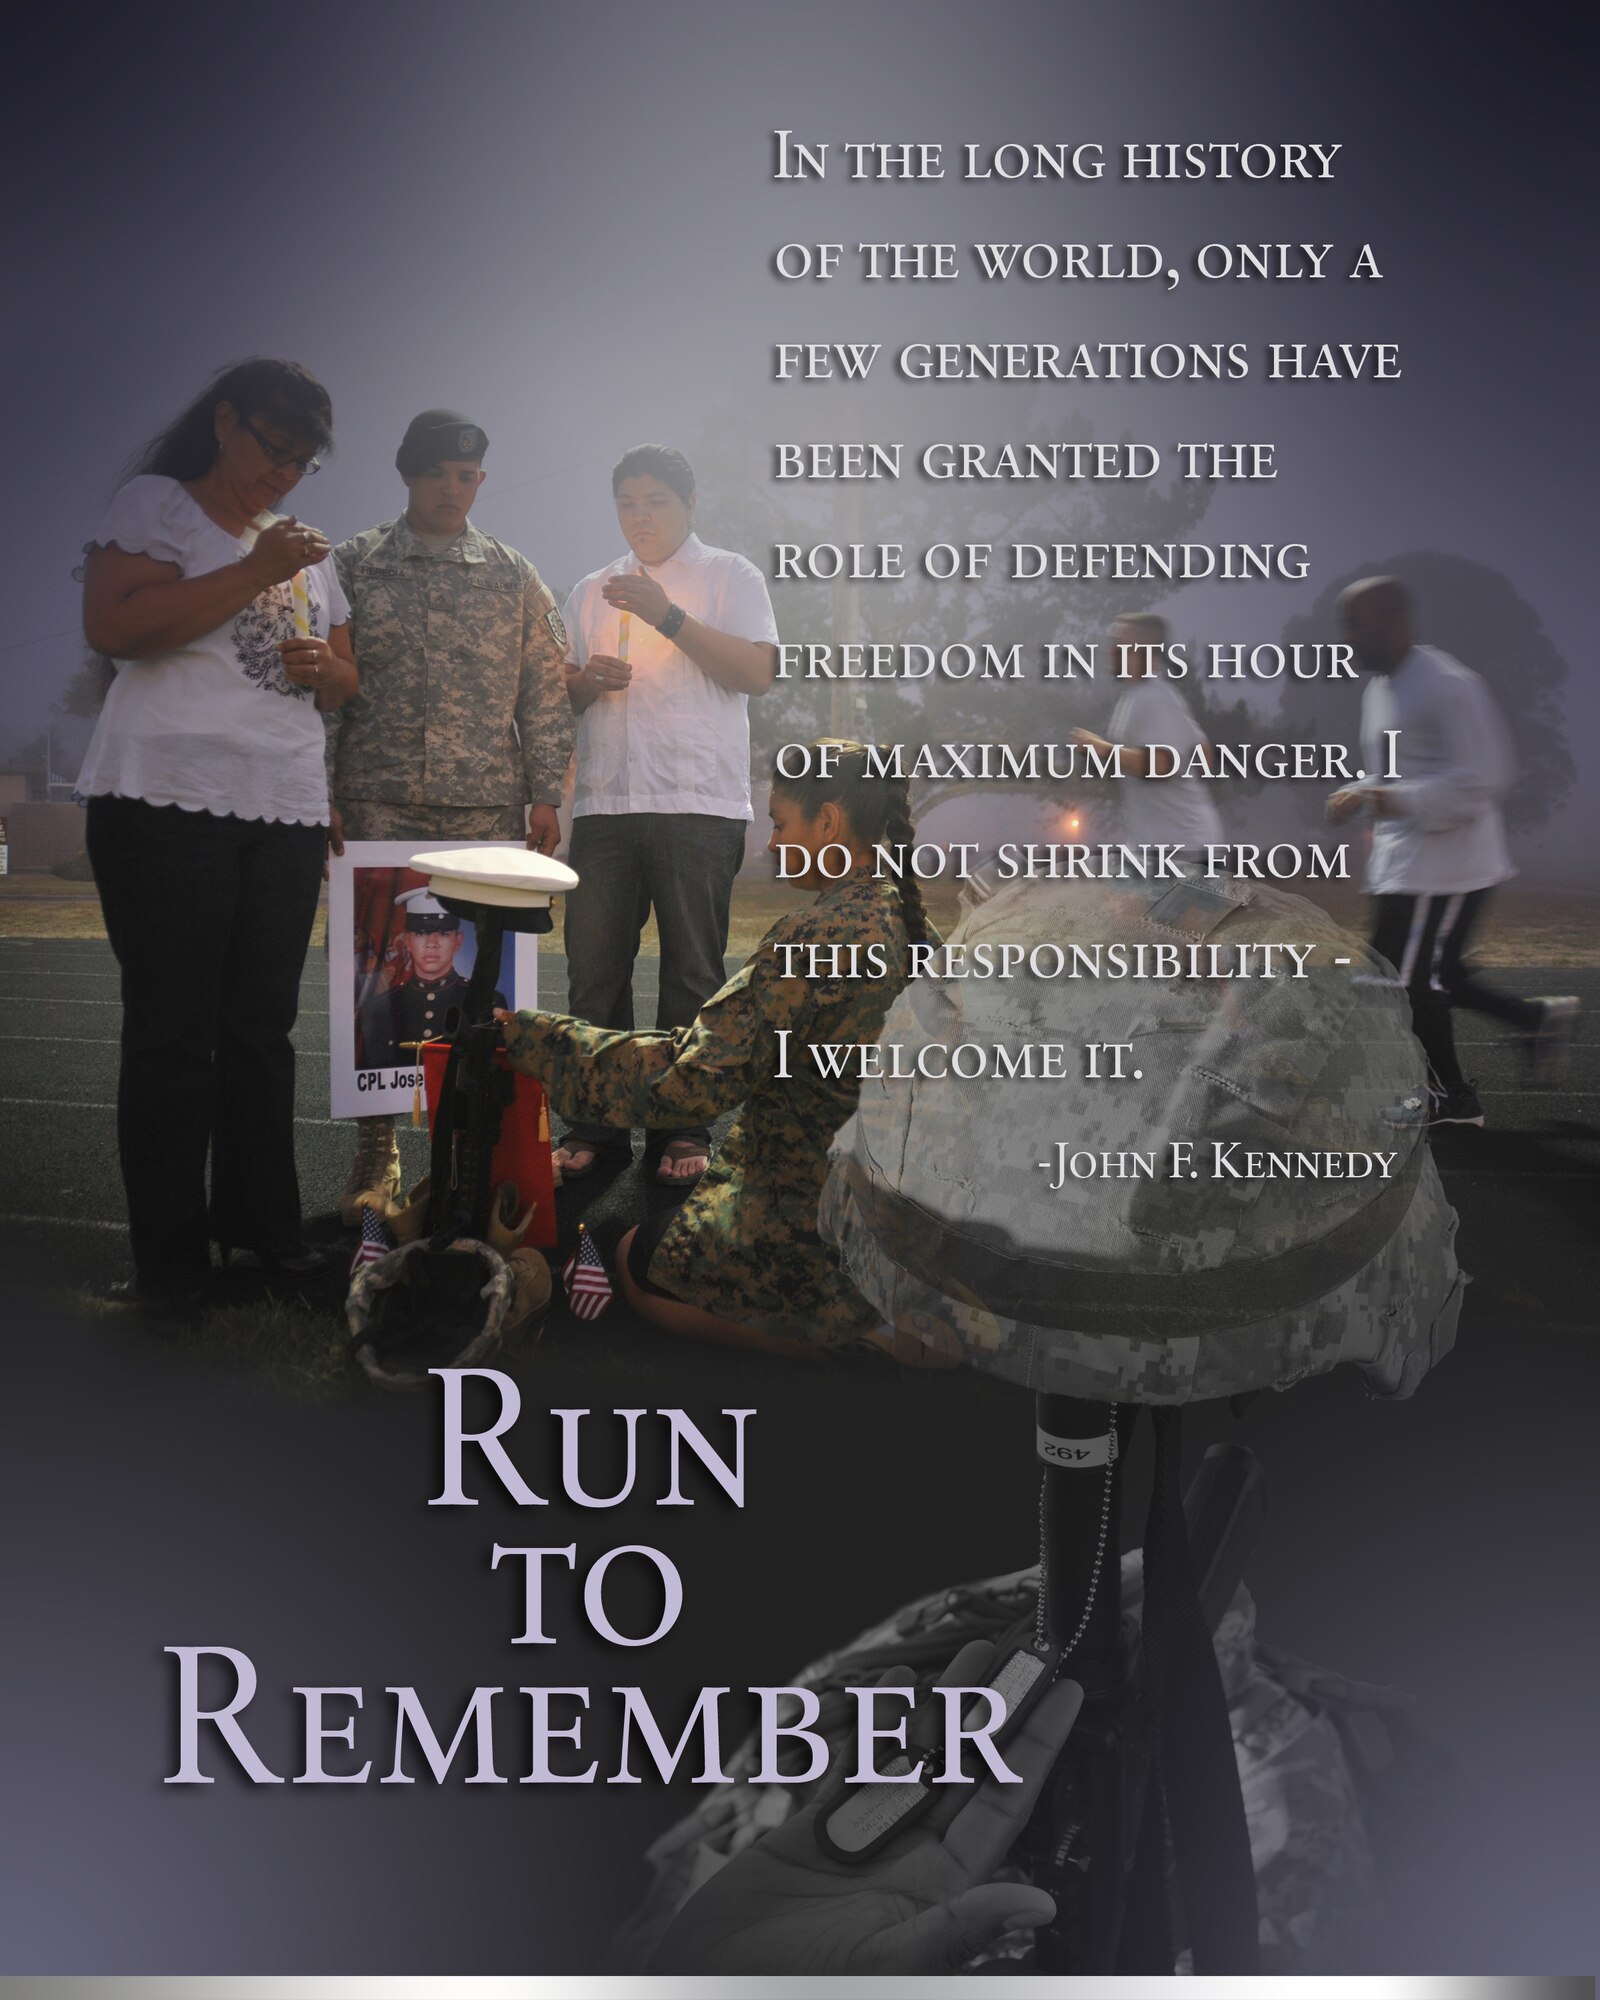 VANDENBERG AIR FORCE BASE, Calif. --  Vandenberg Air Force Base is scheduled to host the 2nd Annual Run to Remember from Oct. 19 to Nov. 11 here. (U.S. Air Force photo illustration/Senior Airman Stephanie Longoria, Senior Airman Antoinette Lyons, Jan Kays)